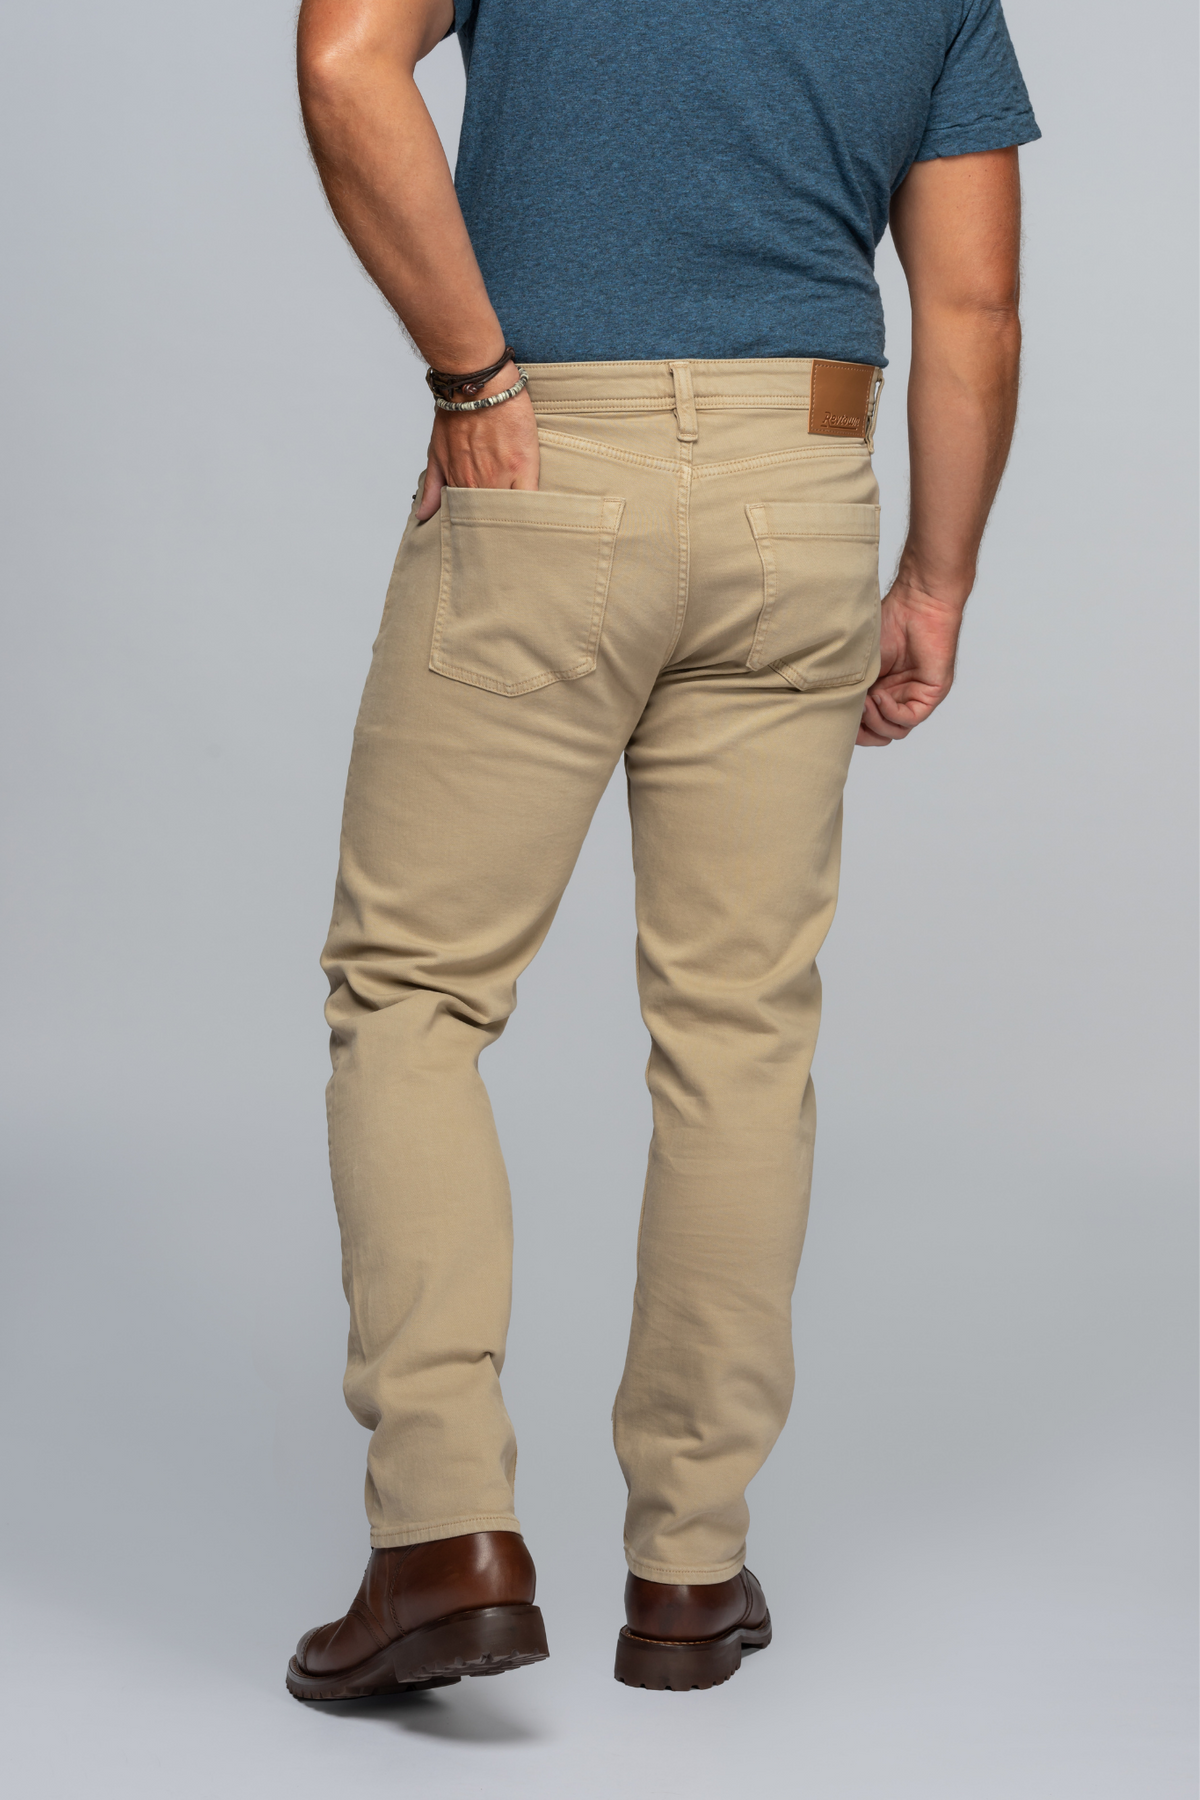 Buy Lee Khaki Skinny Fit Lightly Washed Jeans for Mens Online  Tata CLiQ